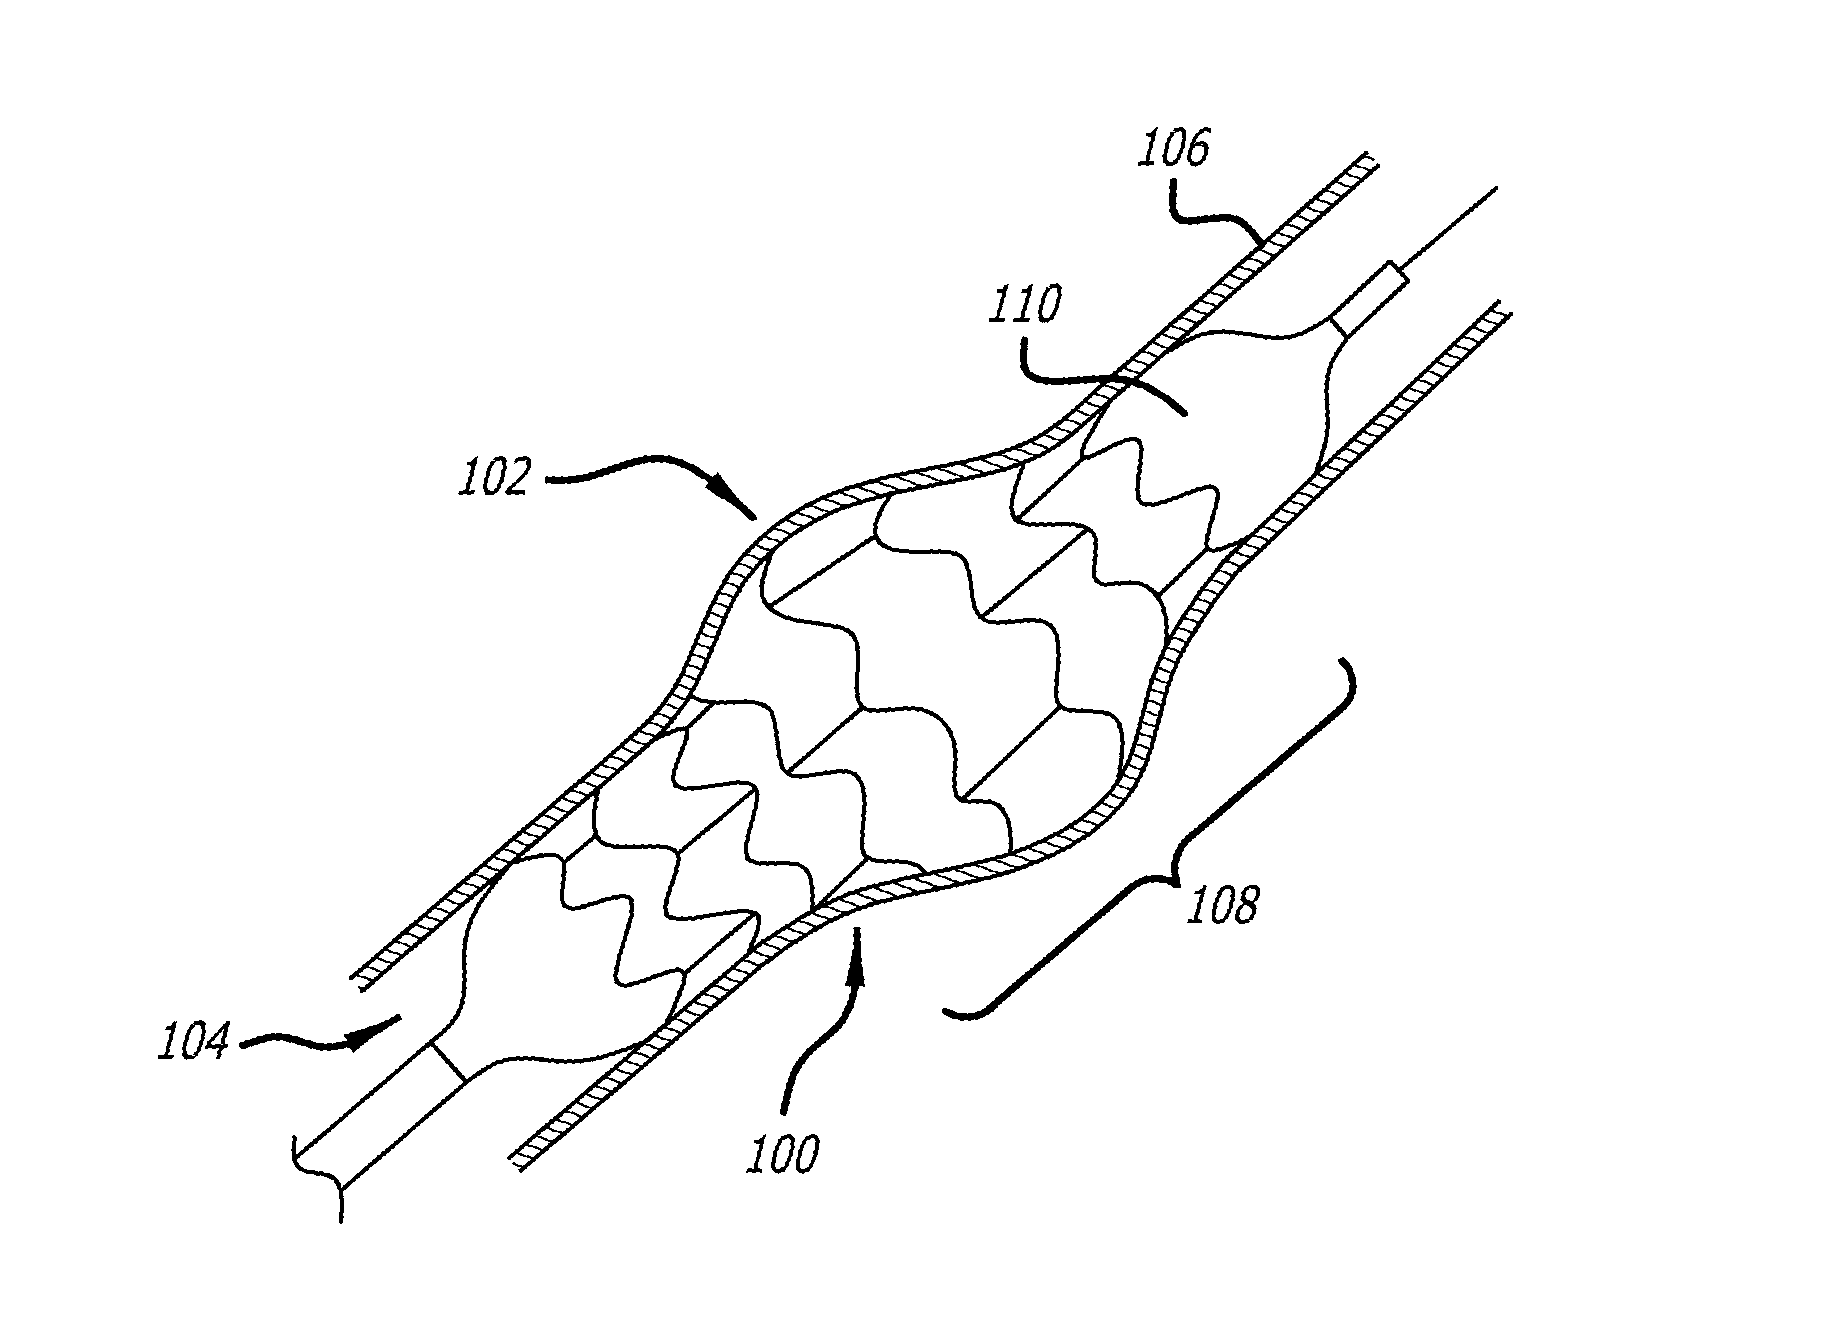 Method of delivering a medical device across a valve